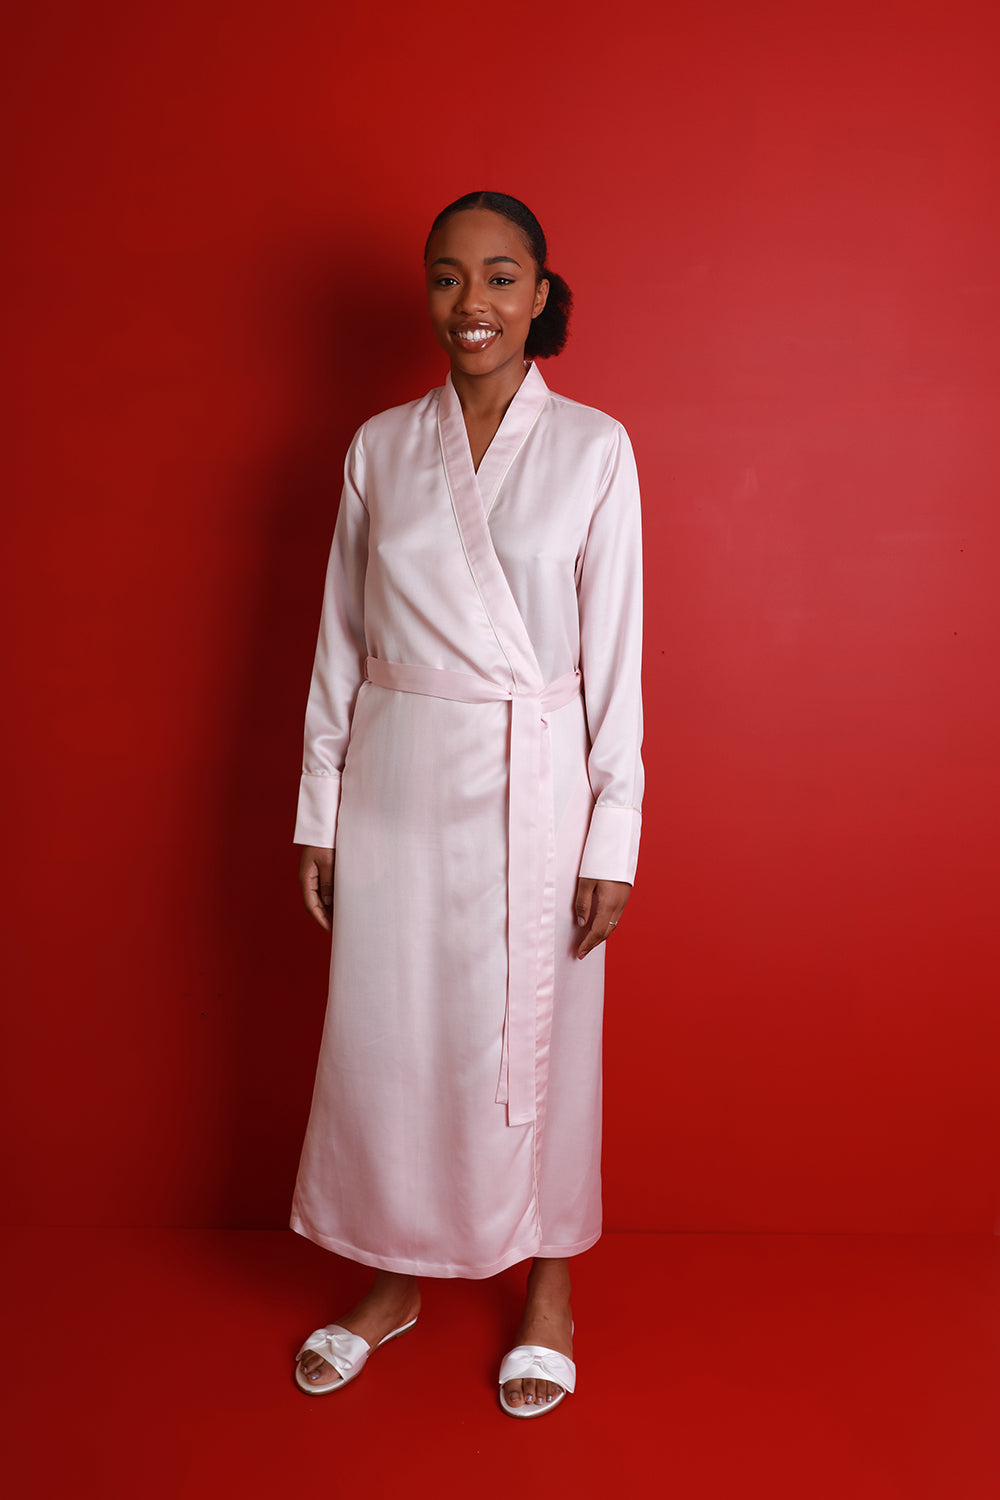 Mulberry Silk Robe - Chennai Pink. Please note that pieces purchased in our Archive Sale can't be refunded. We are happy to offer an exchange, if we have the stock available or a credit note.